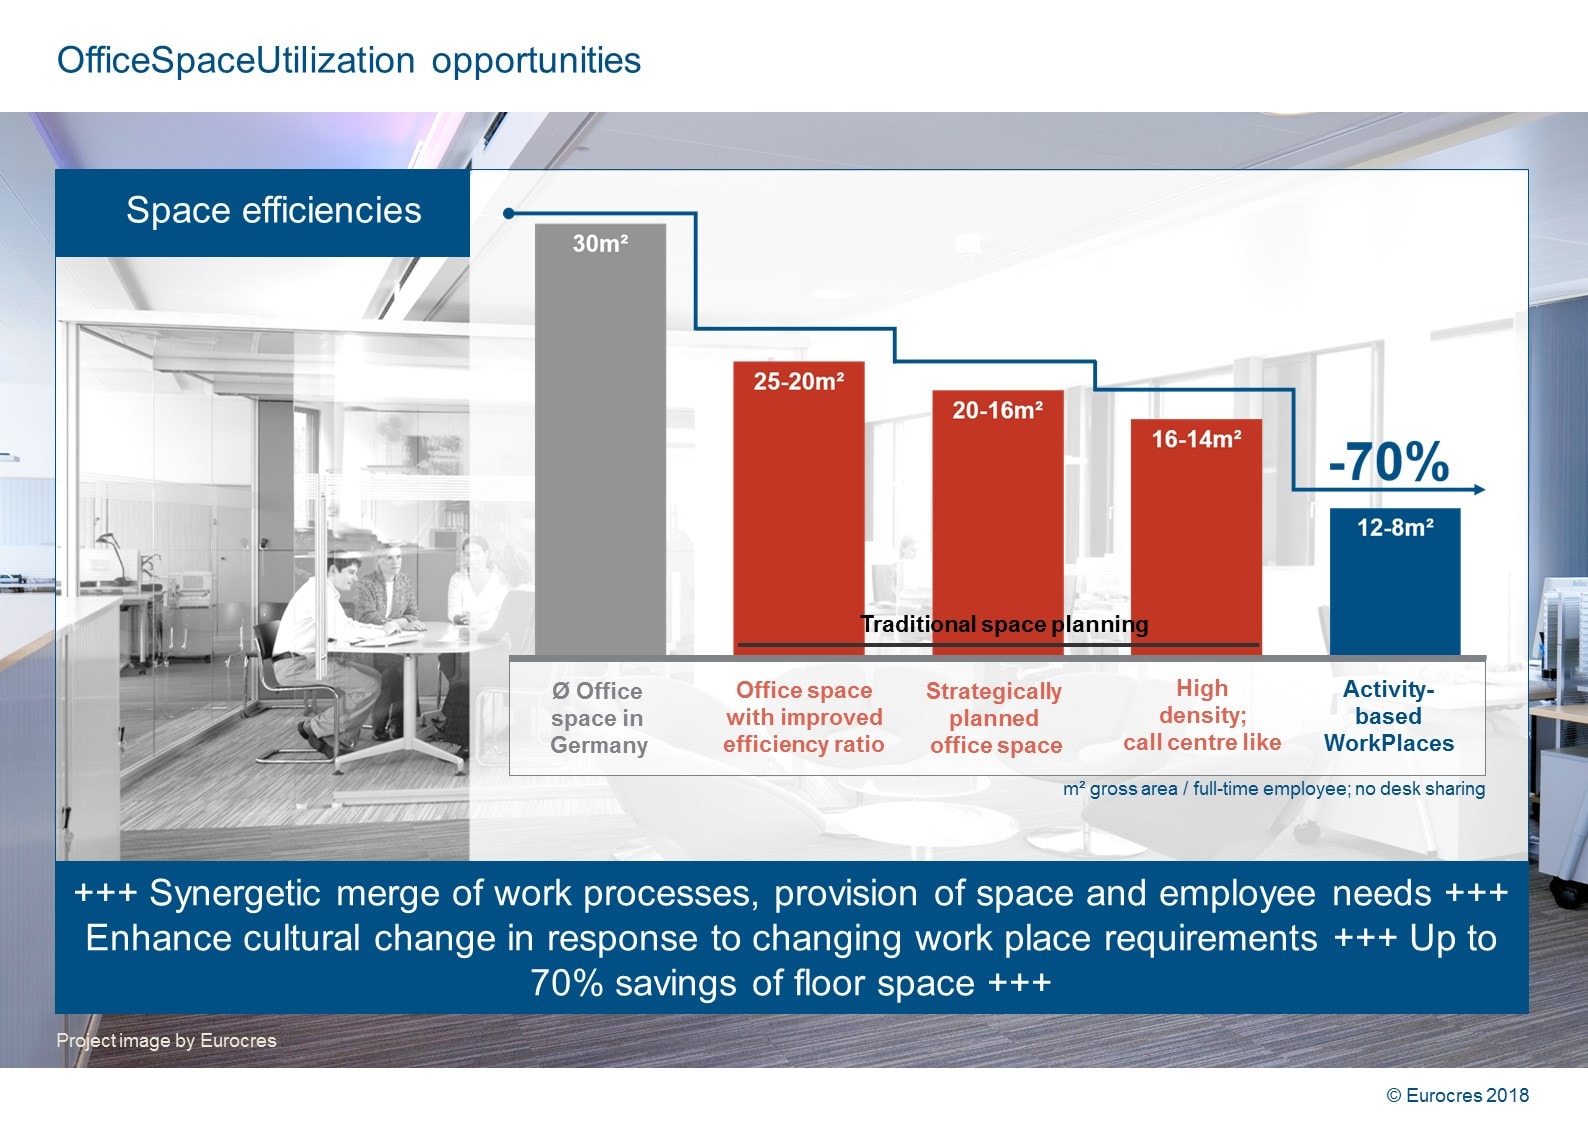 WorkPlace Flash: Office Space Utilization opportunities